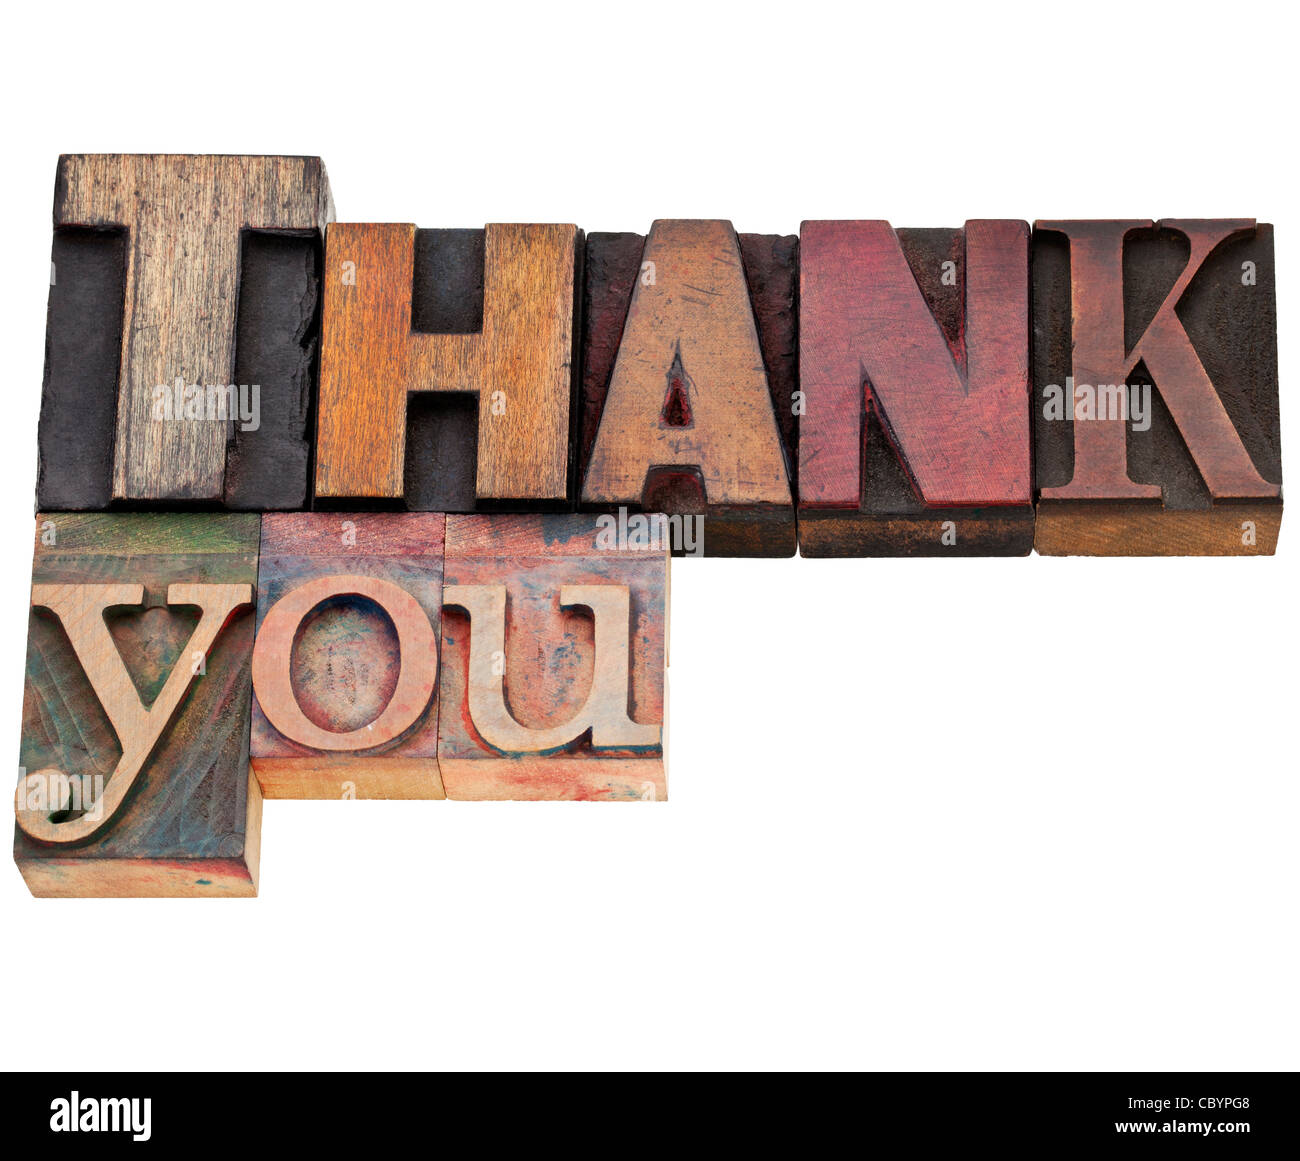 thank you - isolated text in vintage wood letterpress printing blocks stained by color inks Stock Photo